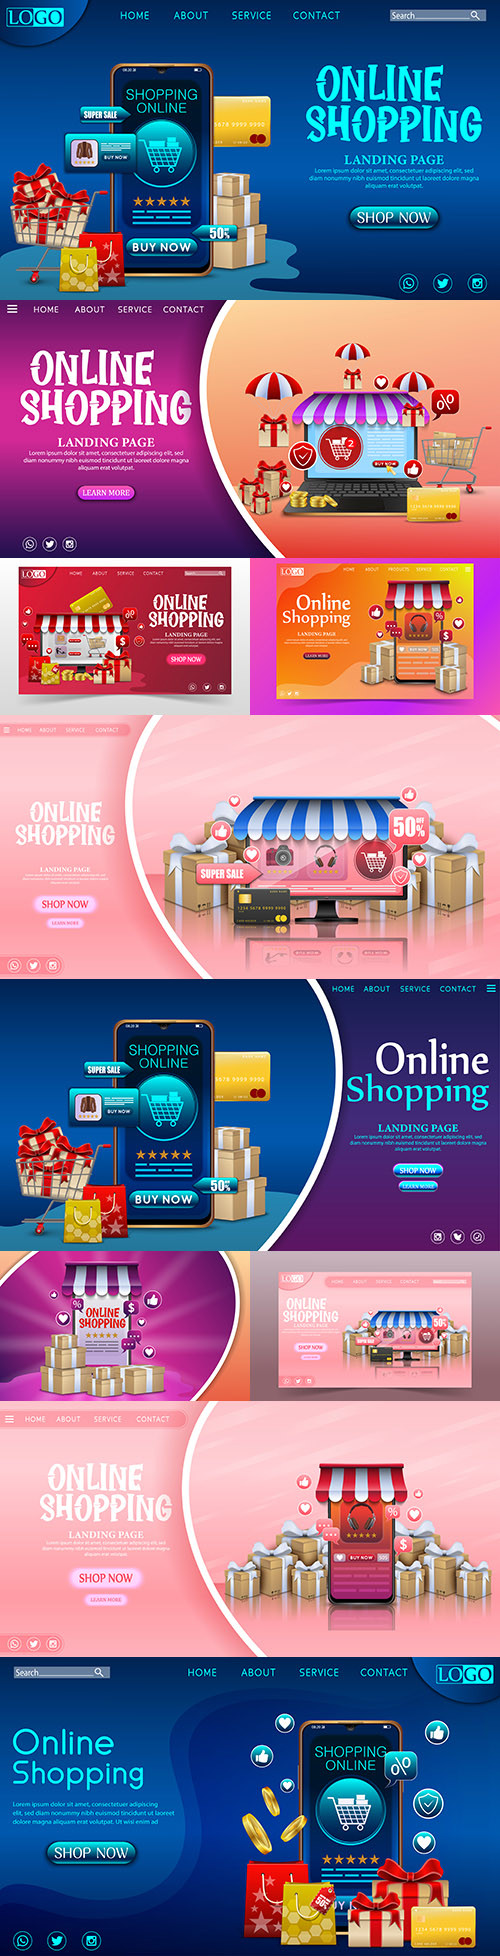 Online store on mobile app with gifts design concept
